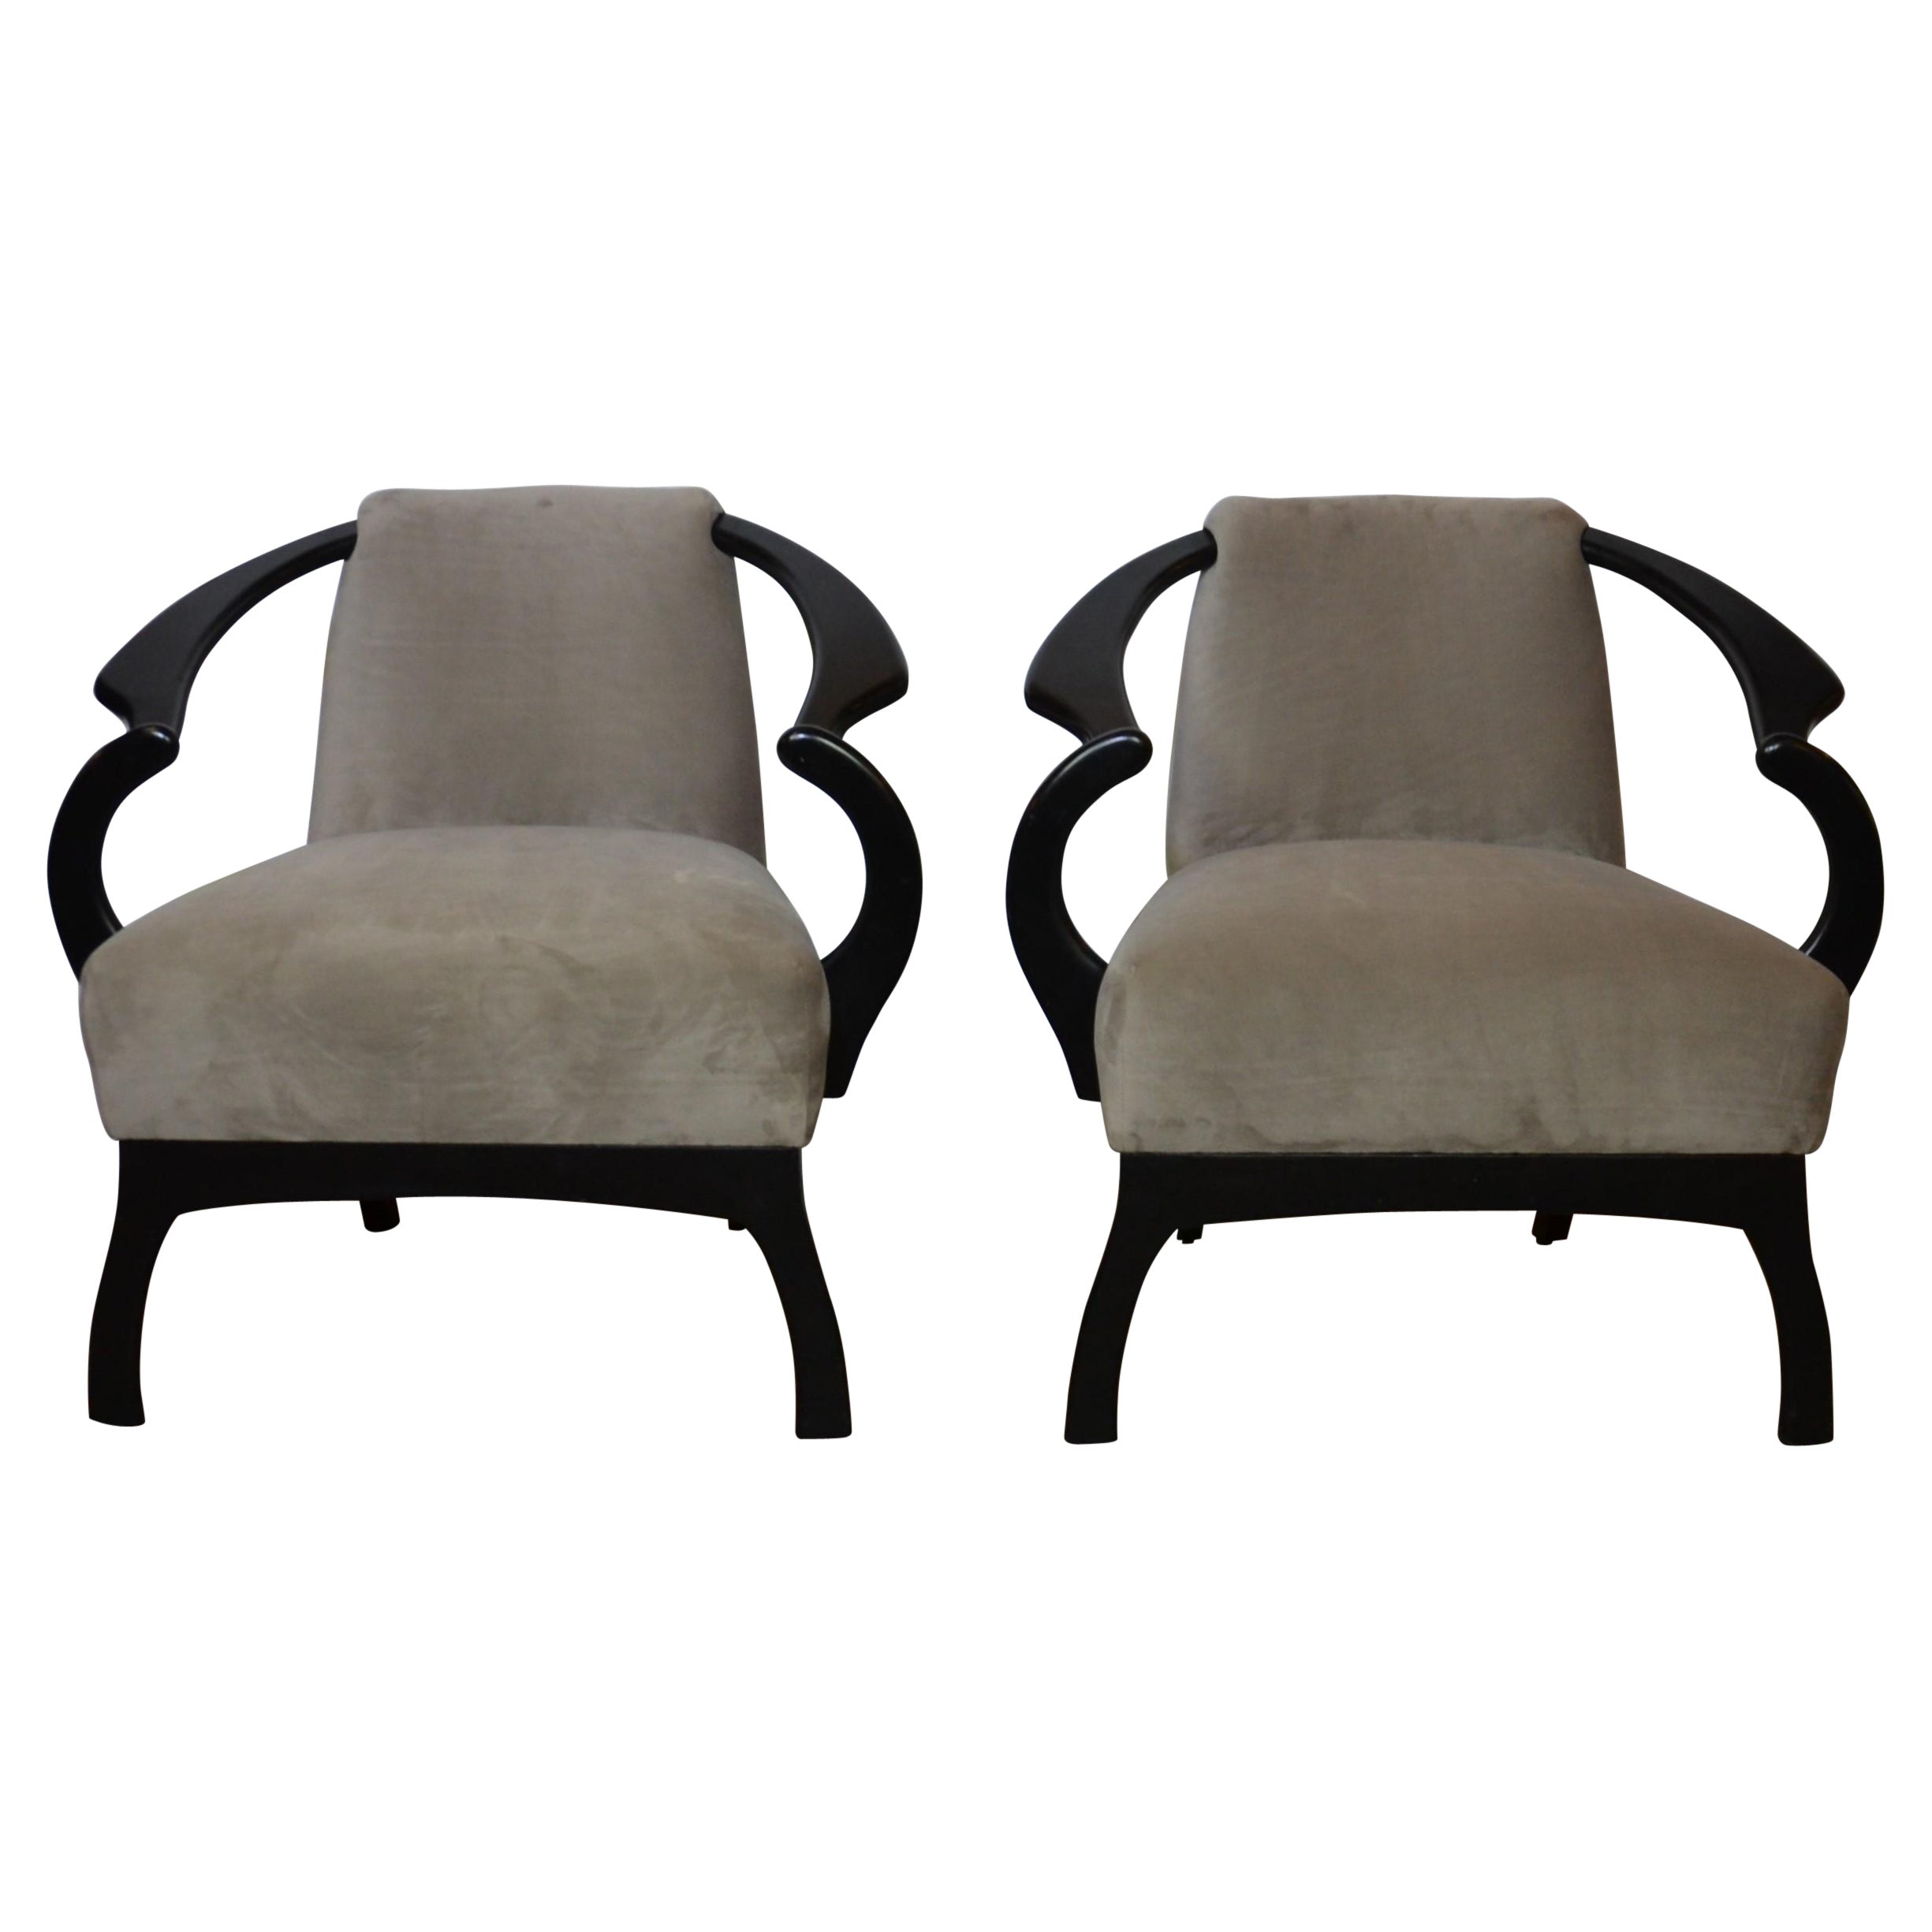 Pair of Modern Chairs S/2